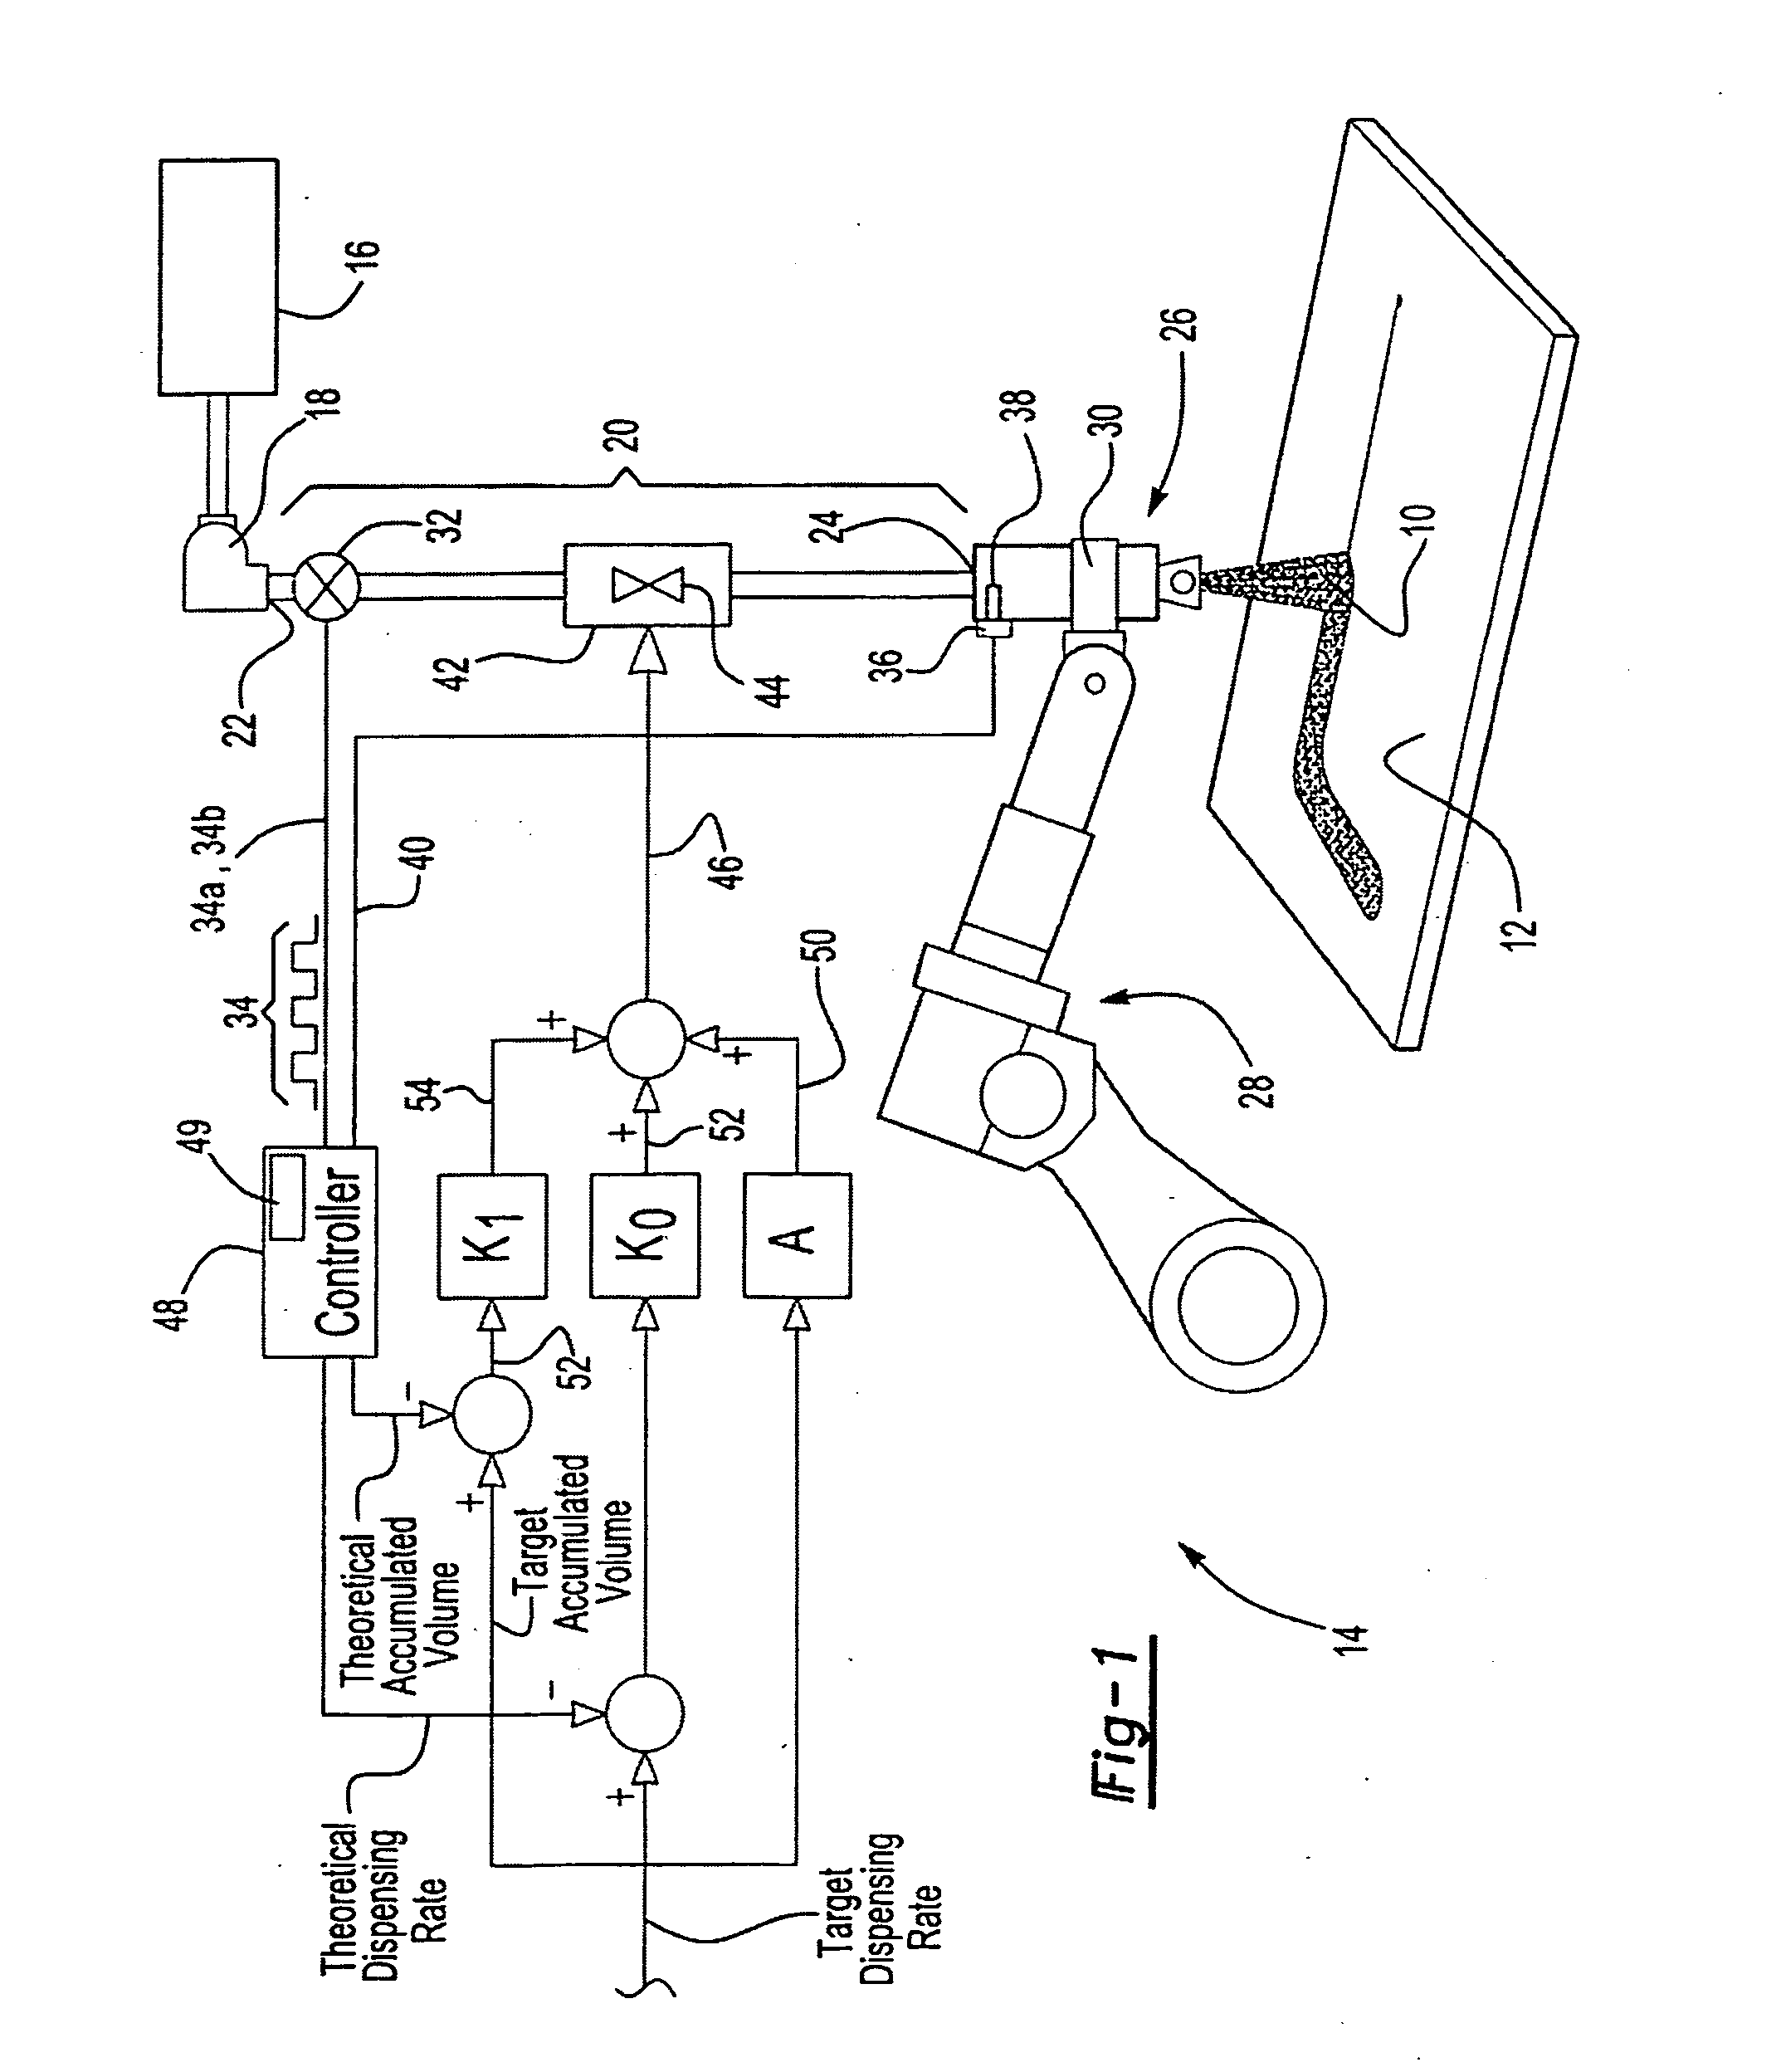 Control and system for dispensing fluid material